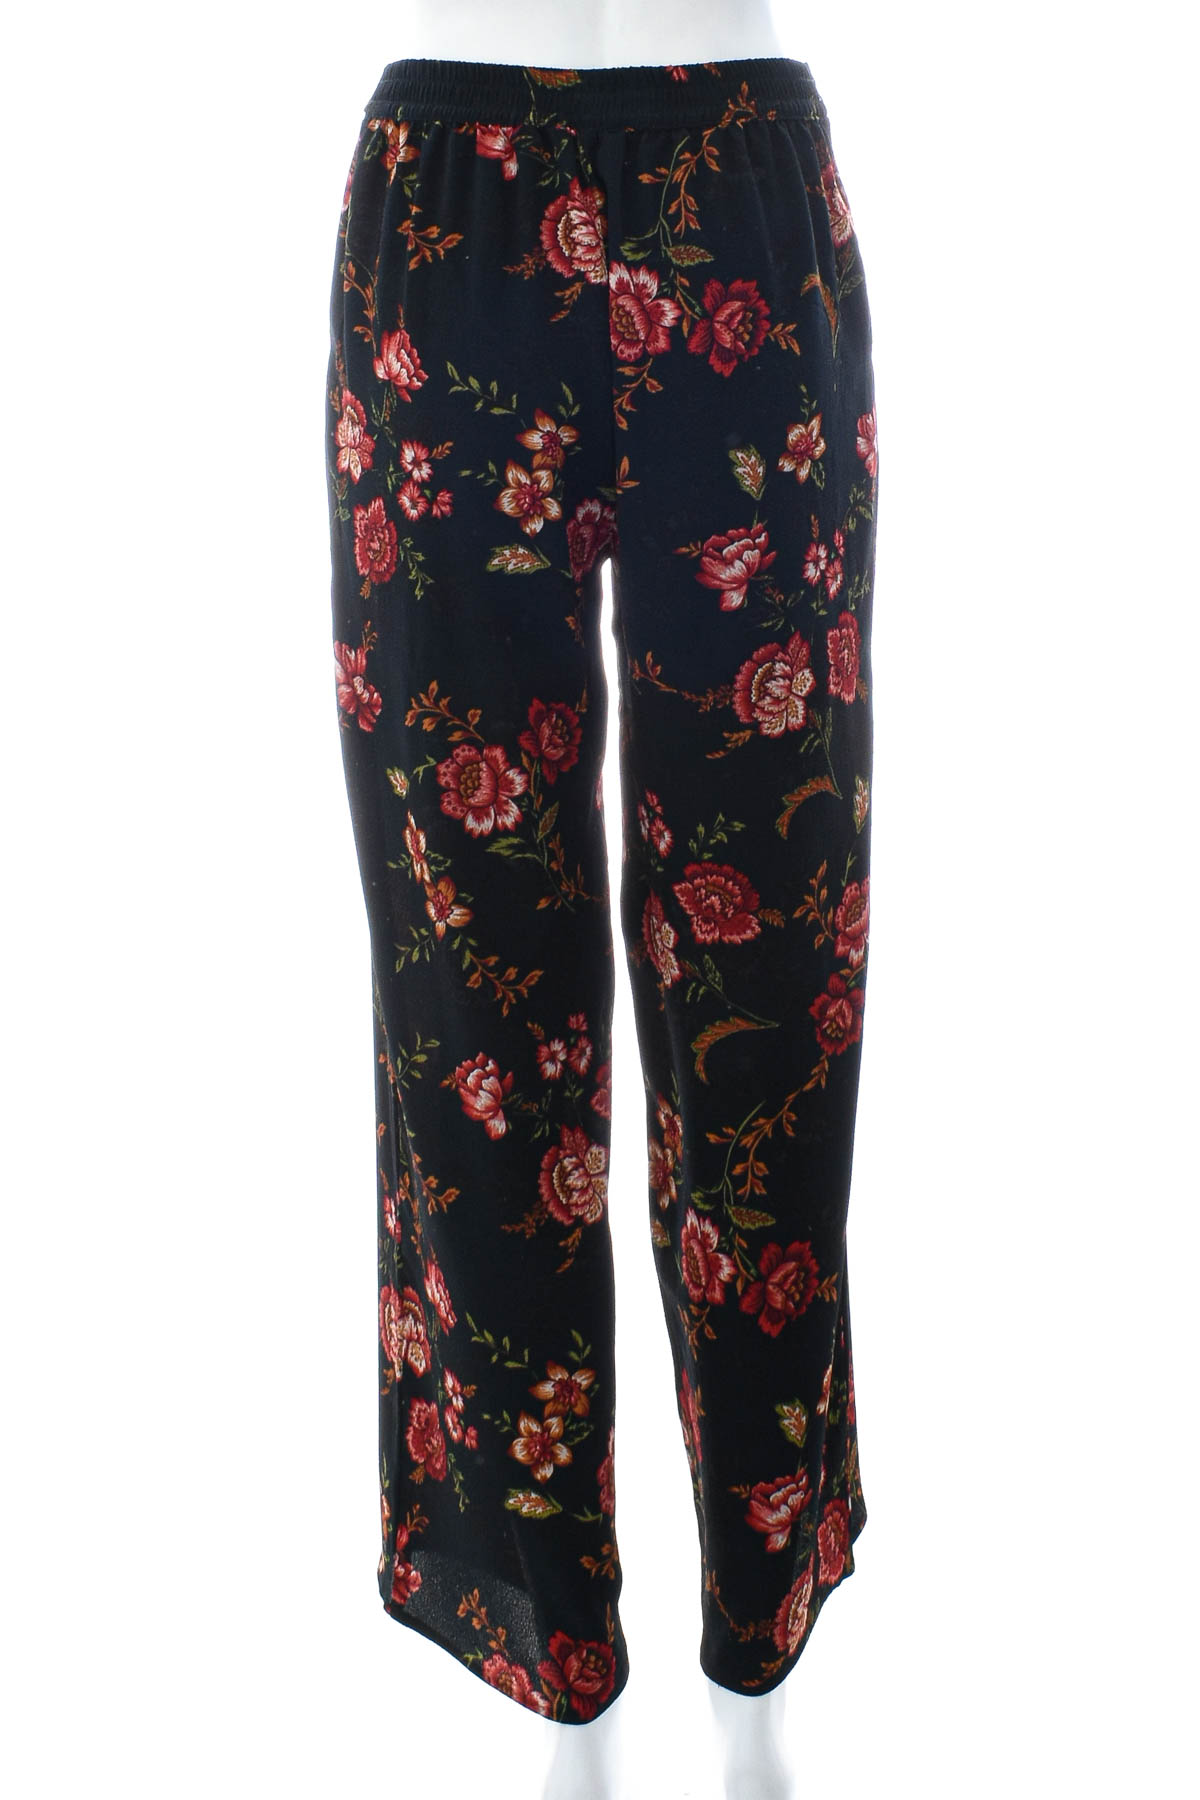 Women's trousers - ONLY - 1